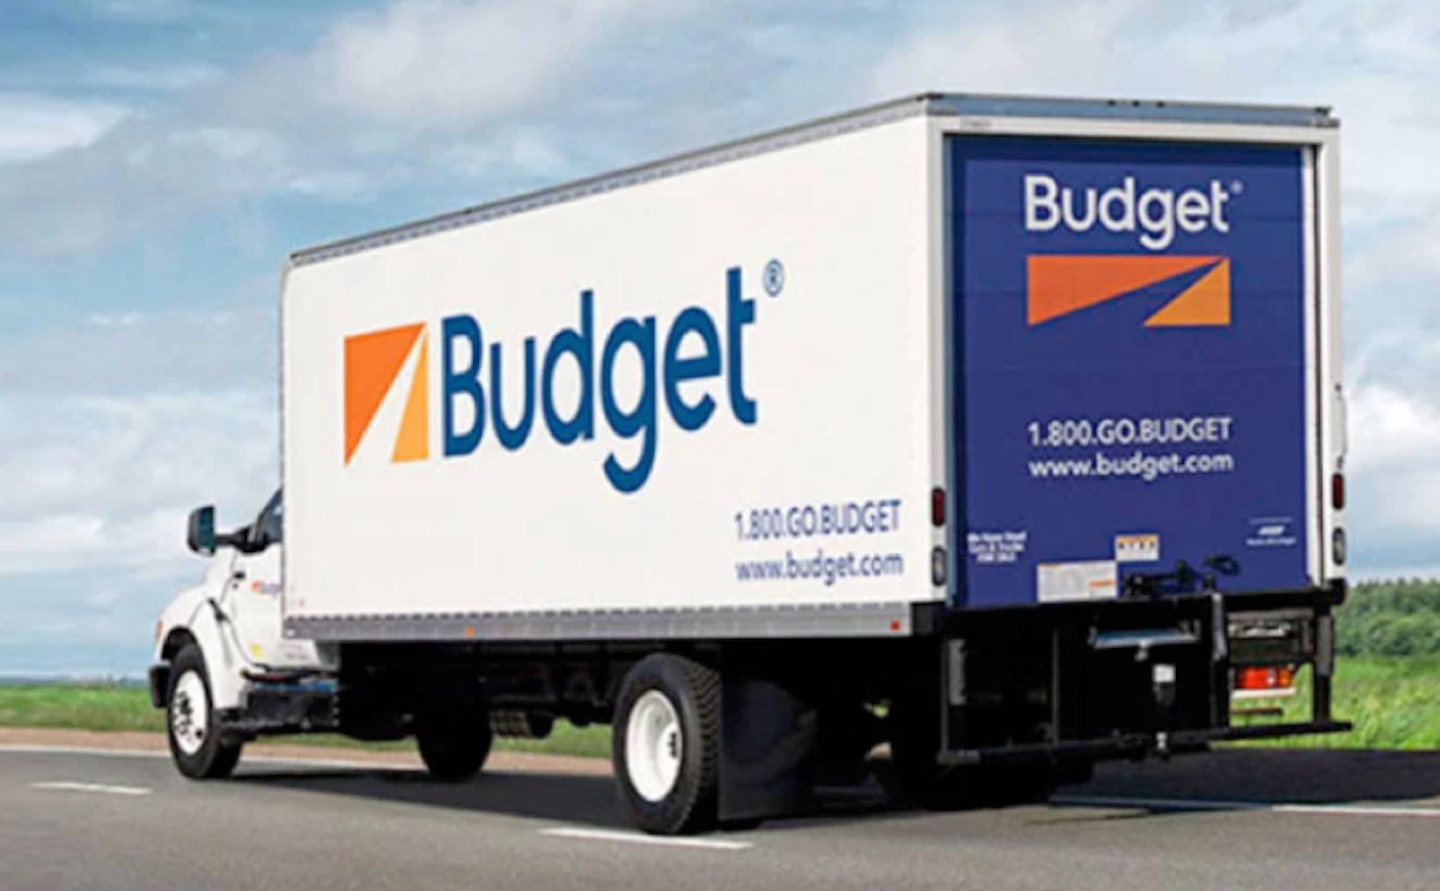 budget truck on road